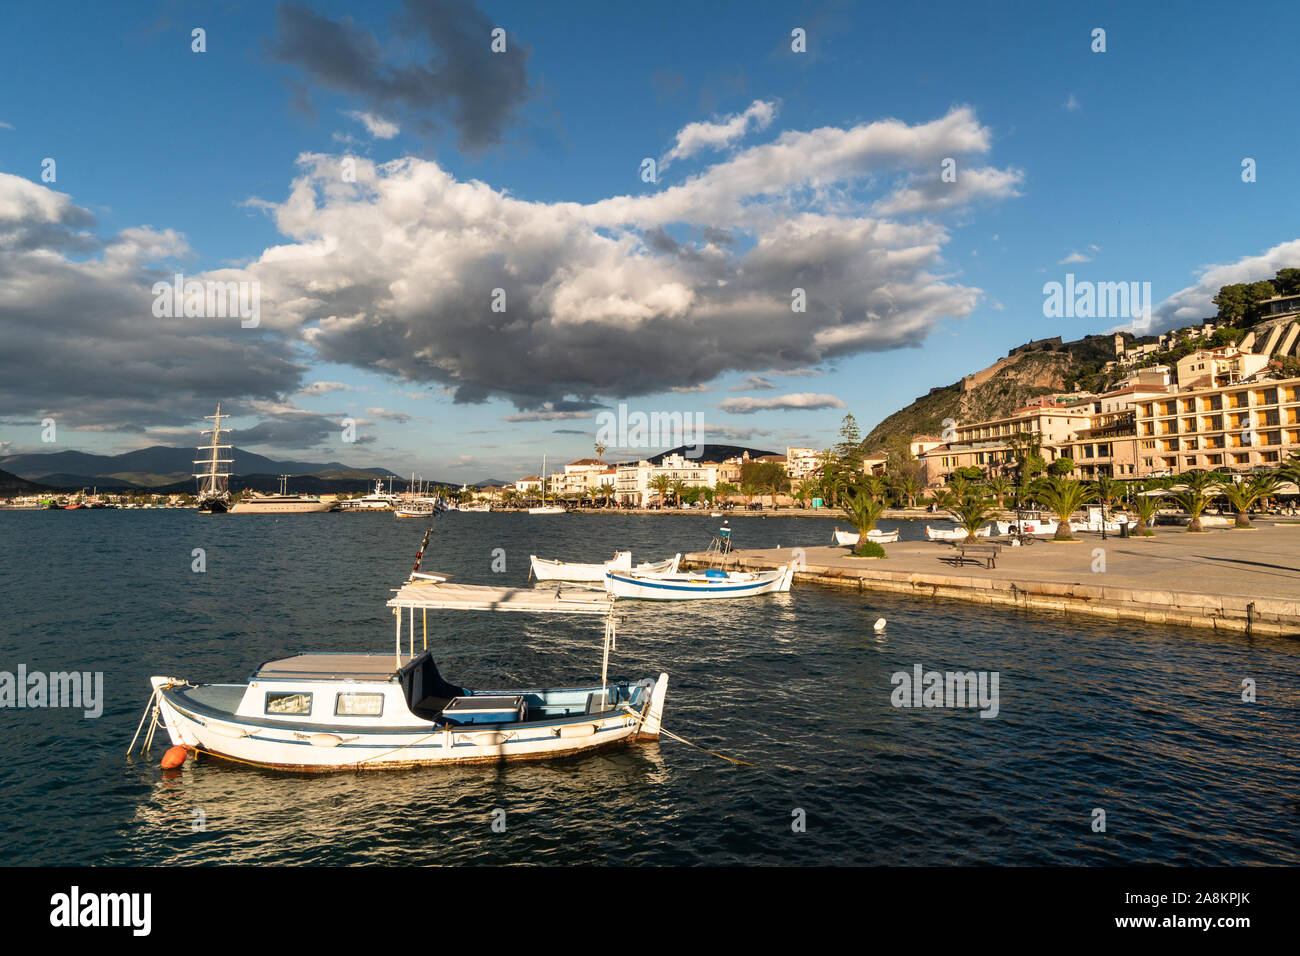 Late afternoon light on the Nafplion waterfront promenade and harbor in the Peloponnese in Greece Stock Photo